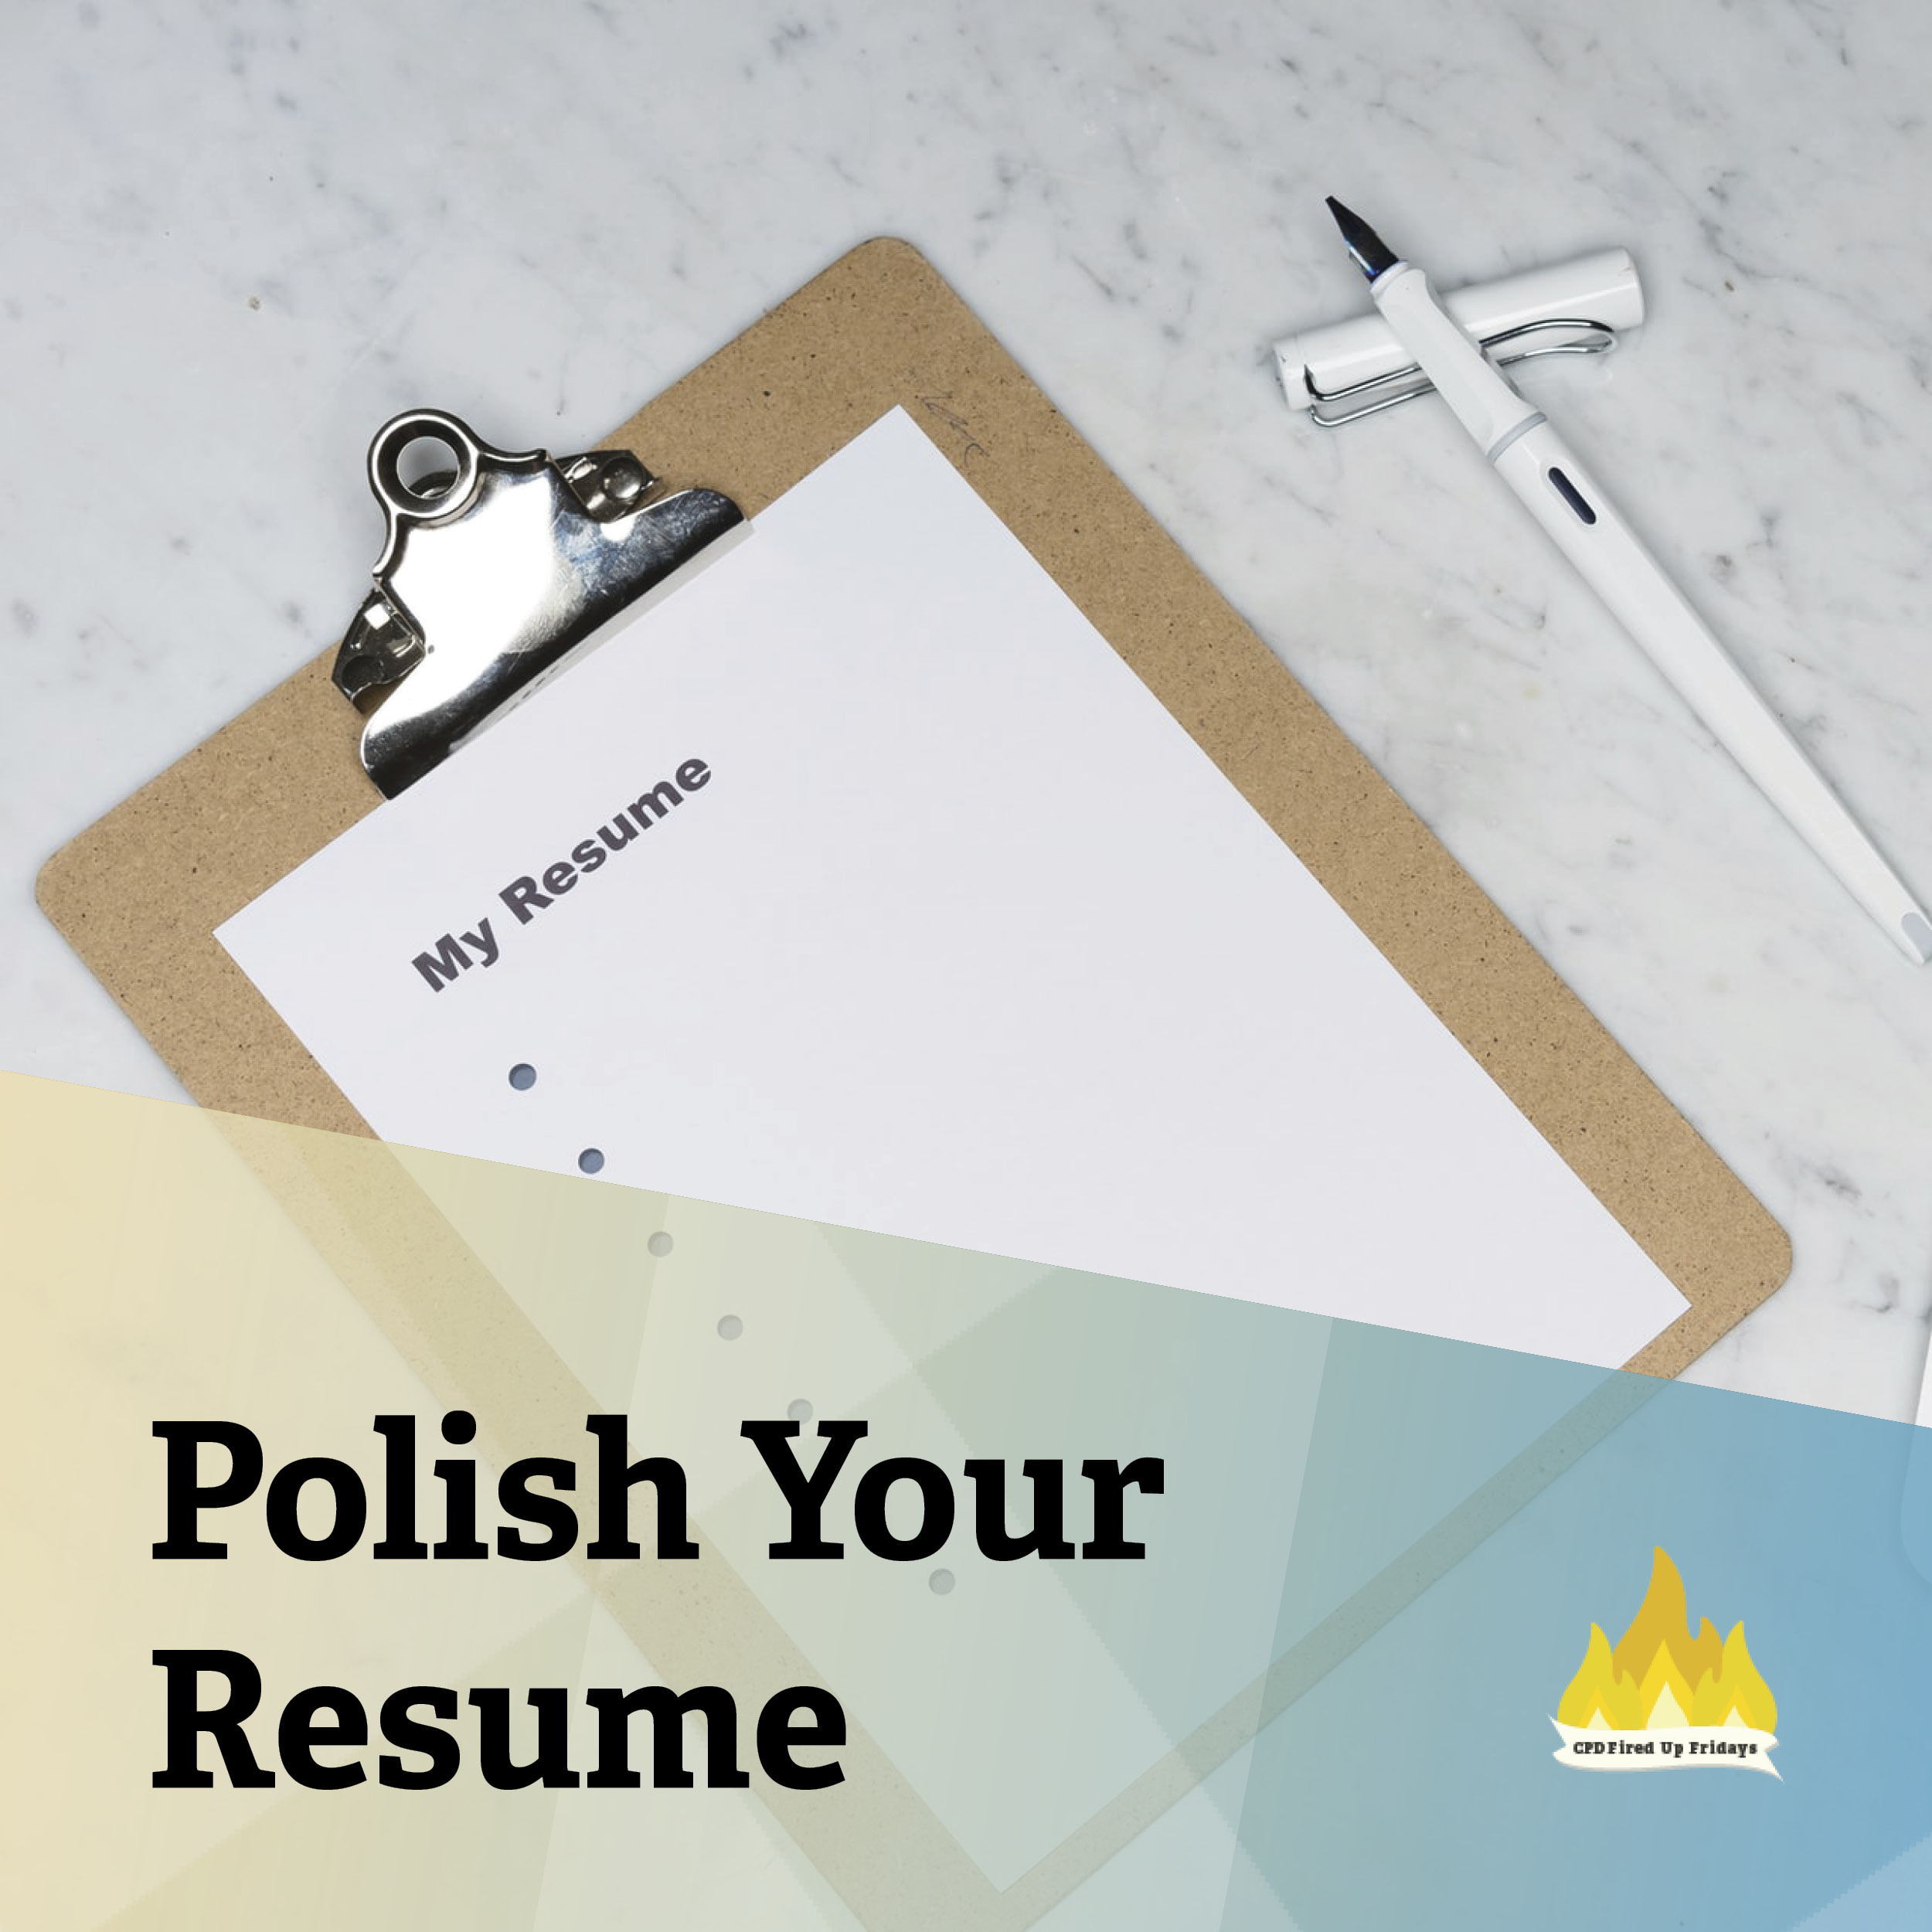 A clipboard rests on a white marble counter. The paper on the clipboard reads: 'My Resume' with blank space underneath. A pen sits ready beside the clipboard. Underneath, the text reads: 'Polish Your Resume.'